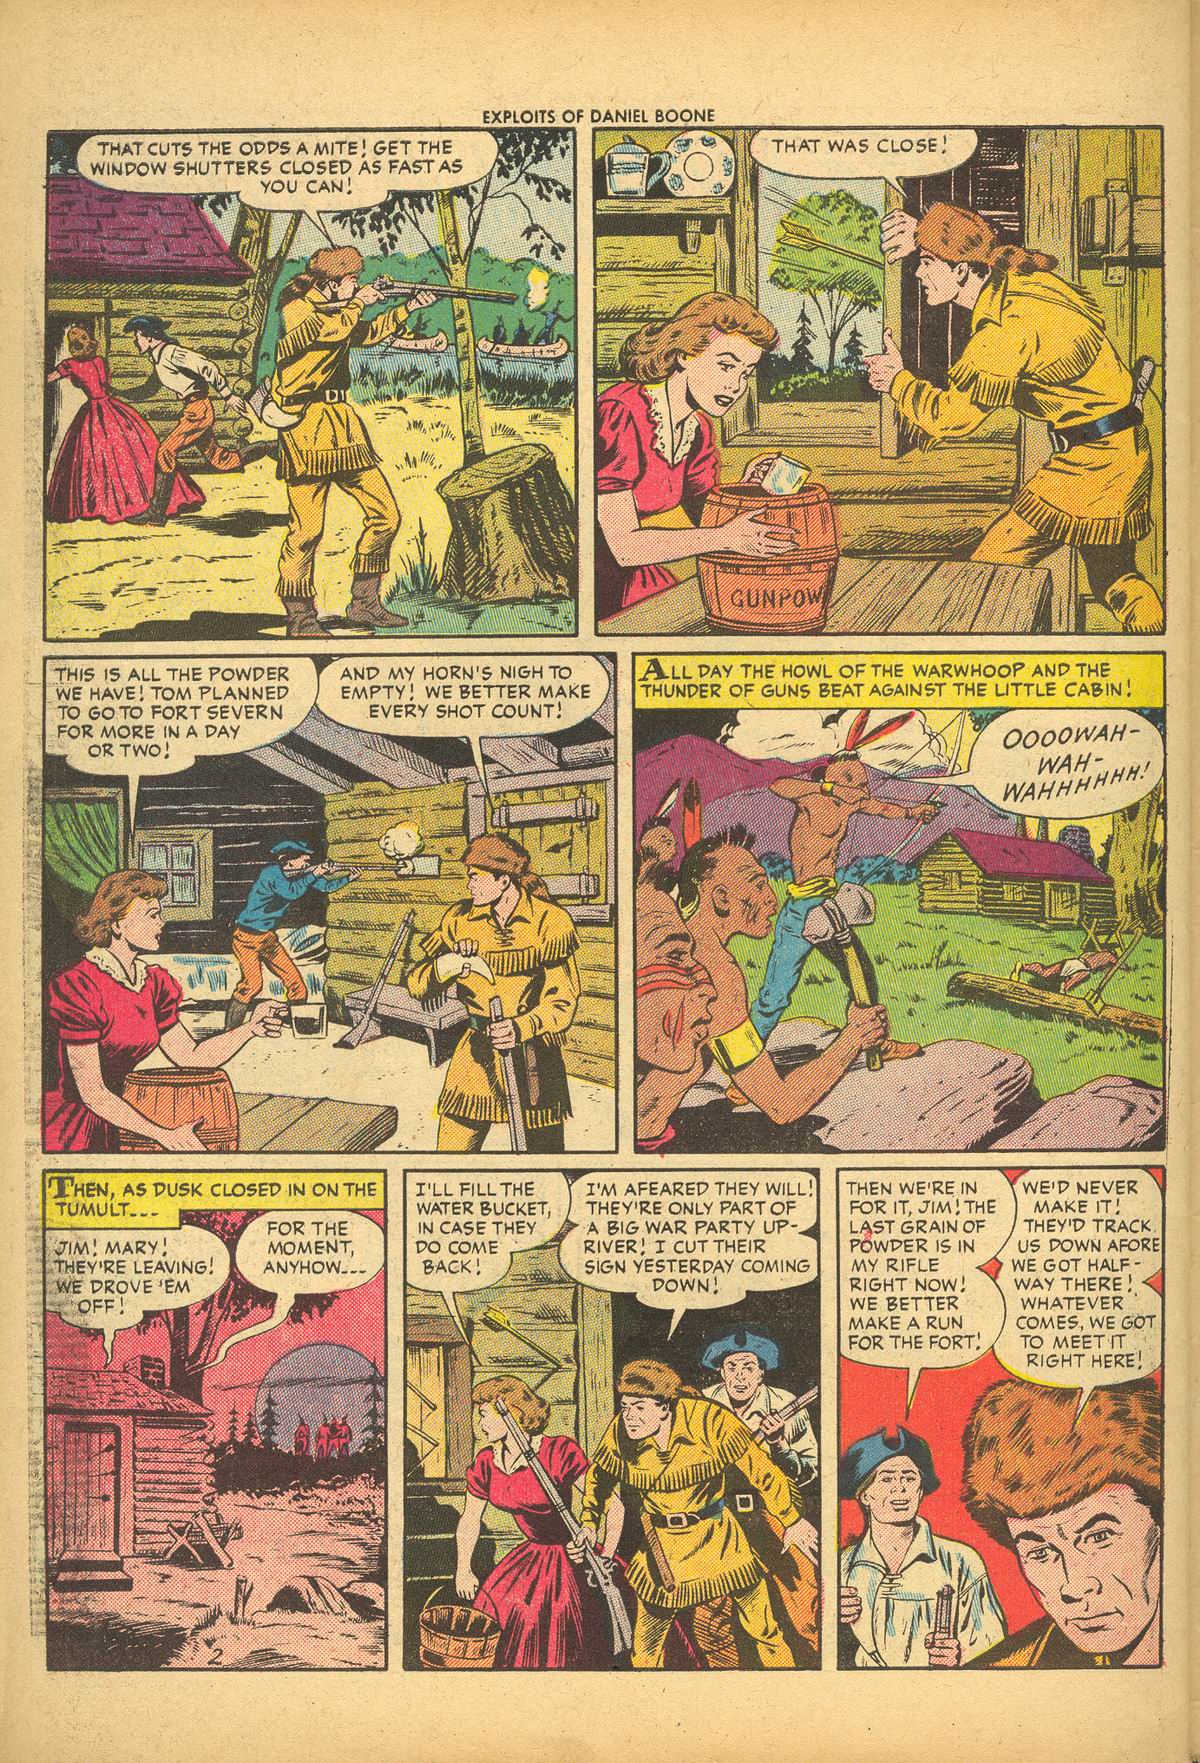 Read online Exploits of Daniel Boone comic -  Issue #3 - 30